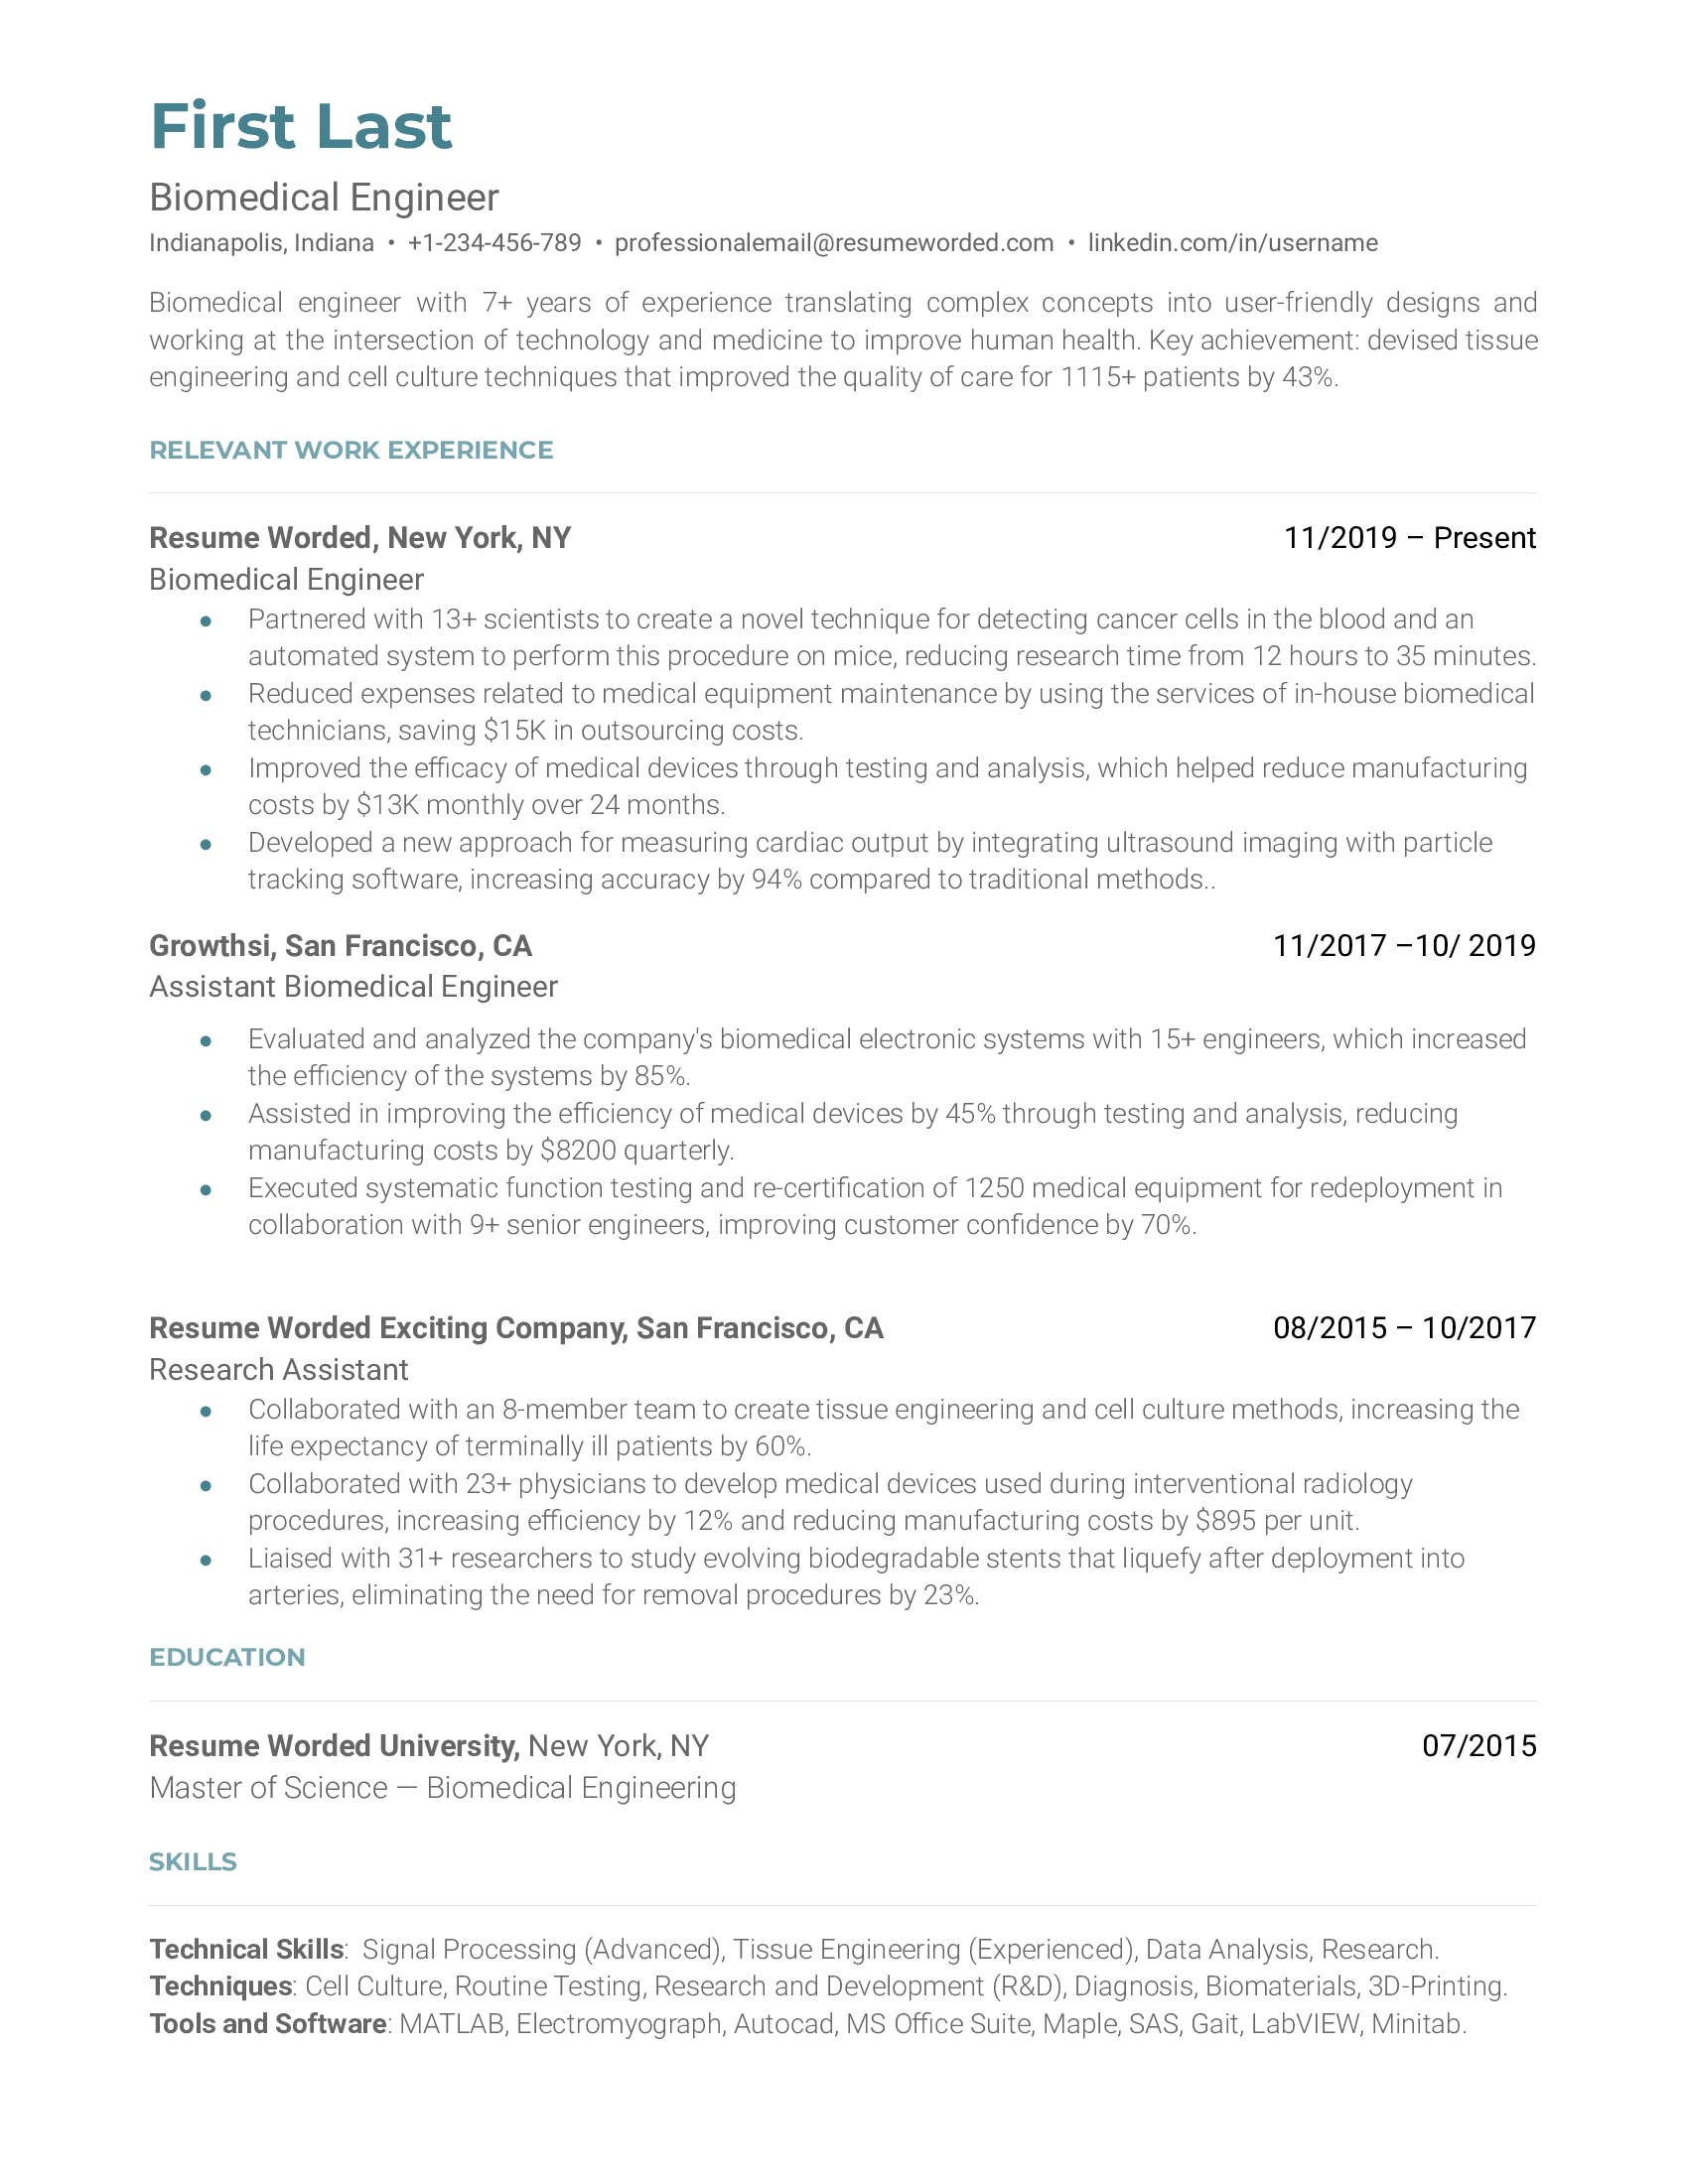 A biomedical engineer resume template that prioritizes relevant work experience